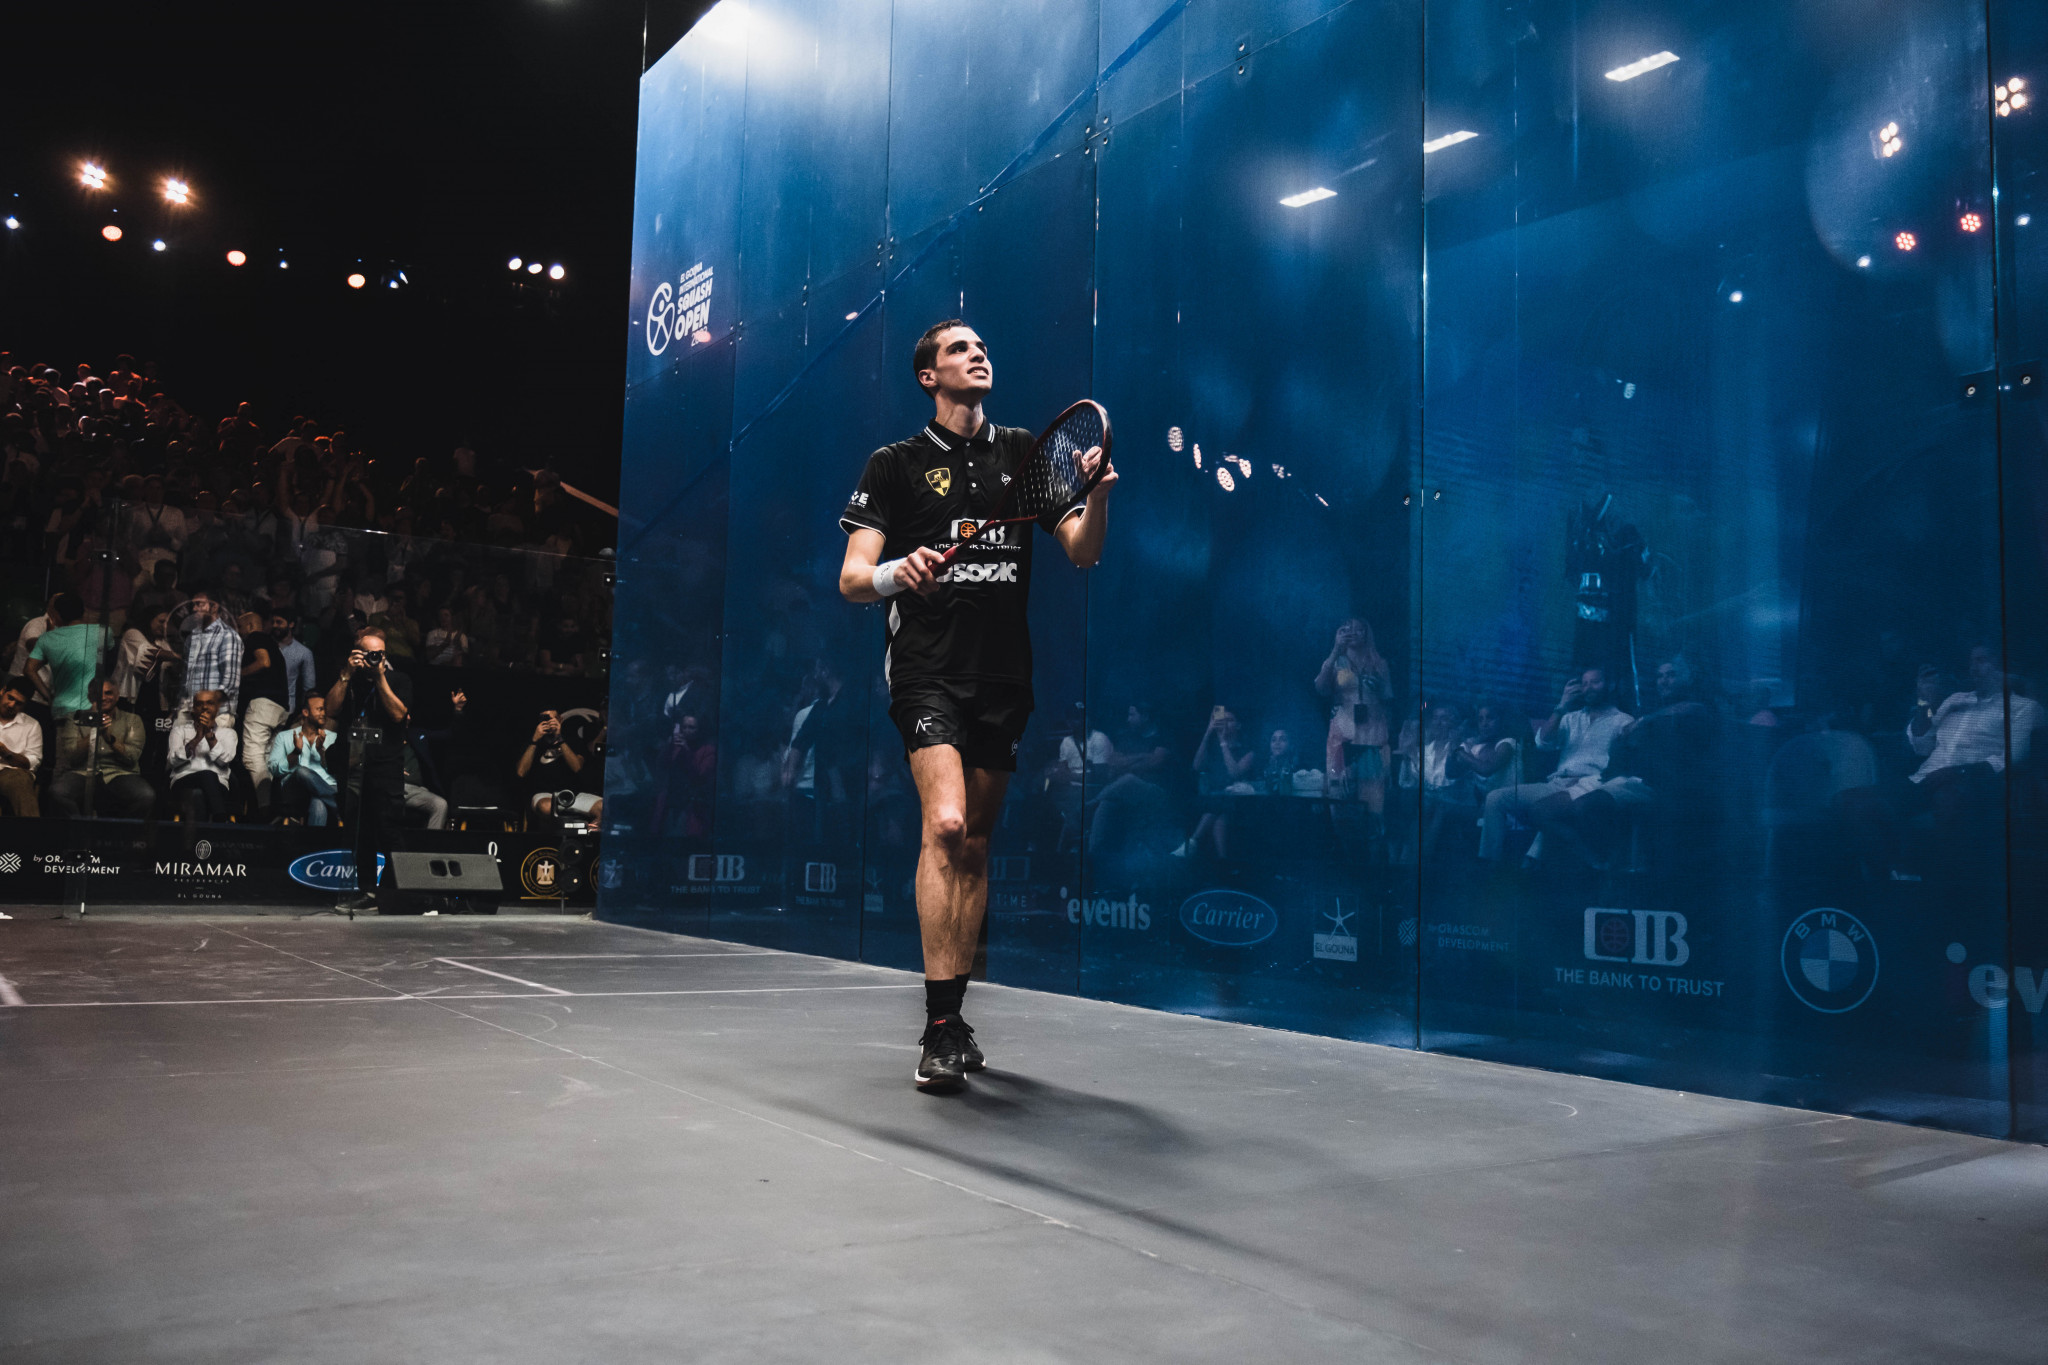 Ali Farag of Egypt celebrates winning the El Gouna International title, which returned him to number one in the men's world squash rankings ©PSA World Tour 